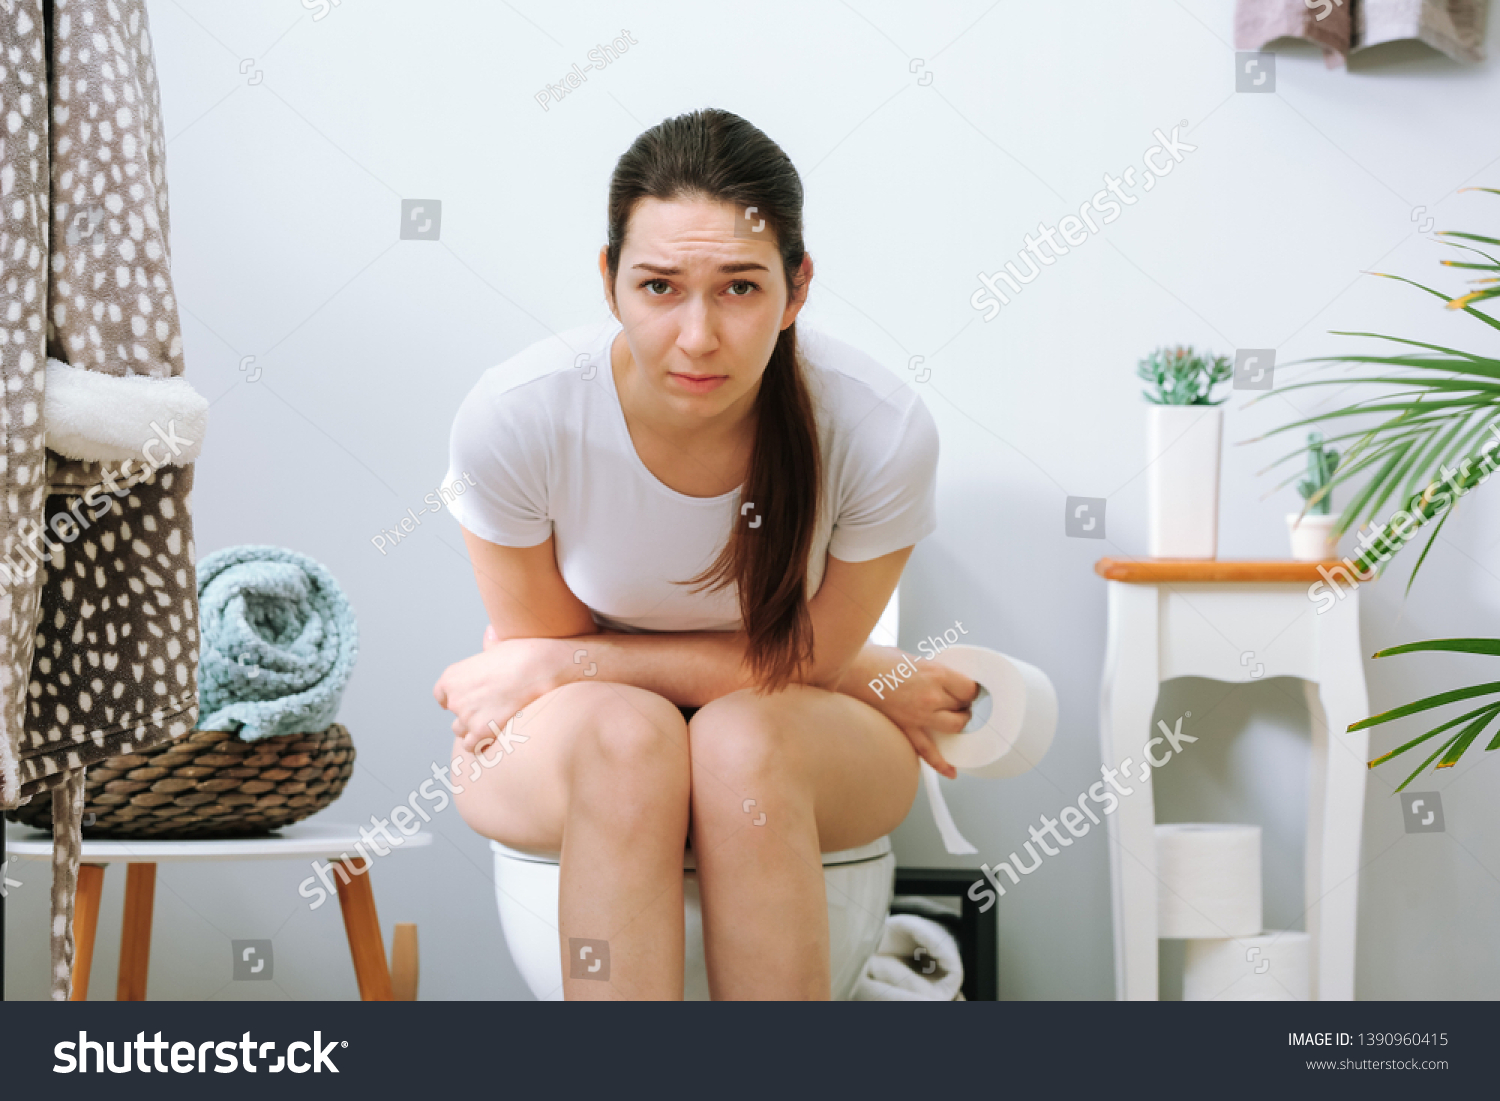 Girls On The Toilet Constipated